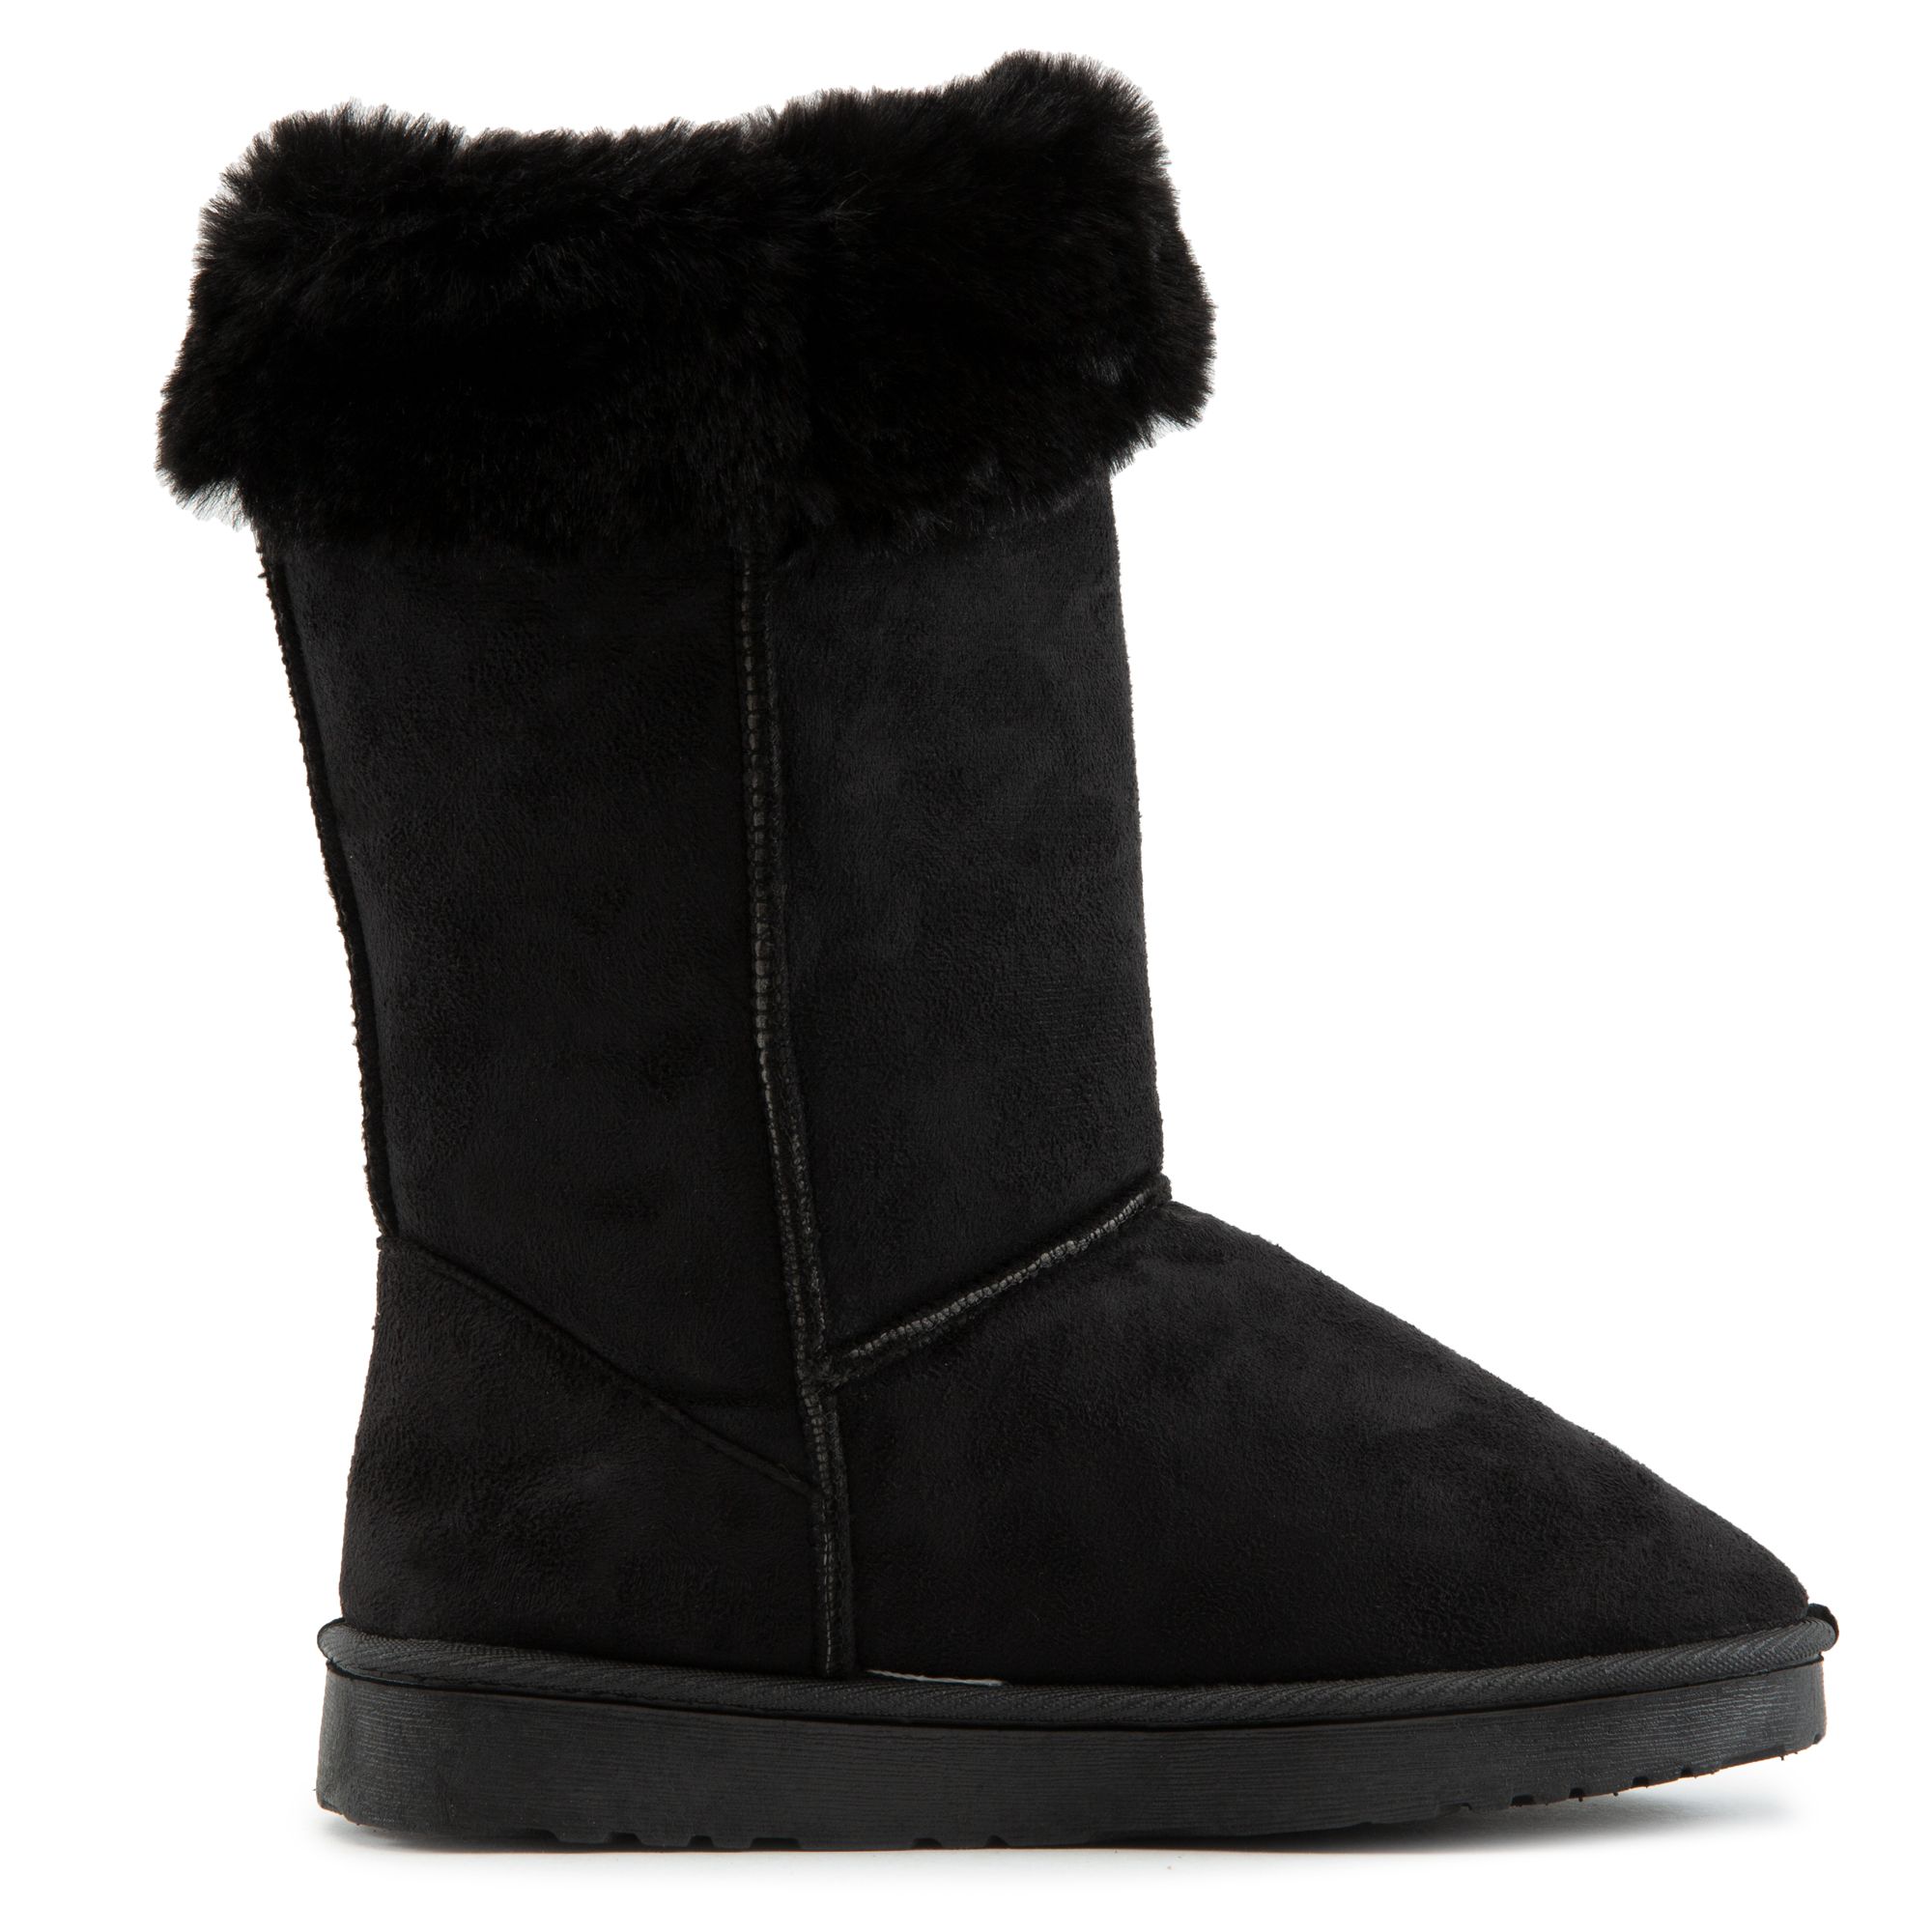 UNKNOWN Lexi-R001 Fur Booties R001-220-BLK - Shiekh